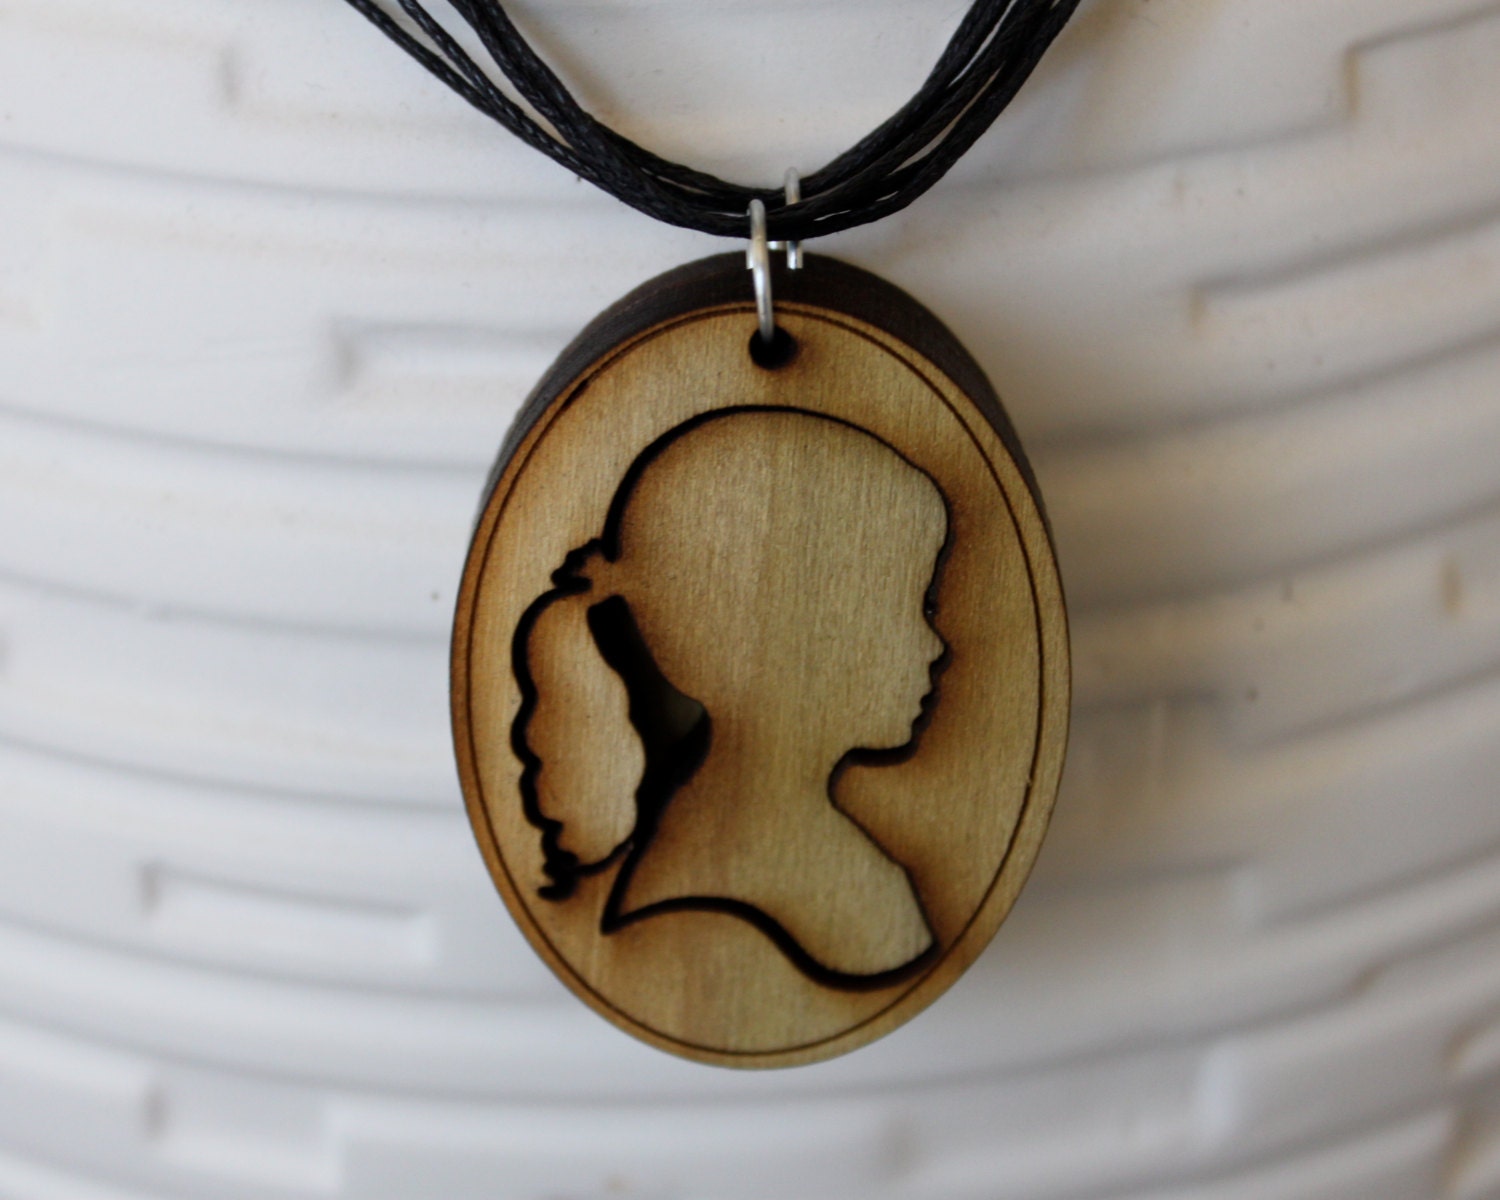 2 "Like Sisters" Silhouette Cameo Best Friend Necklaces Laser-Cut Wood - JDBmercantile